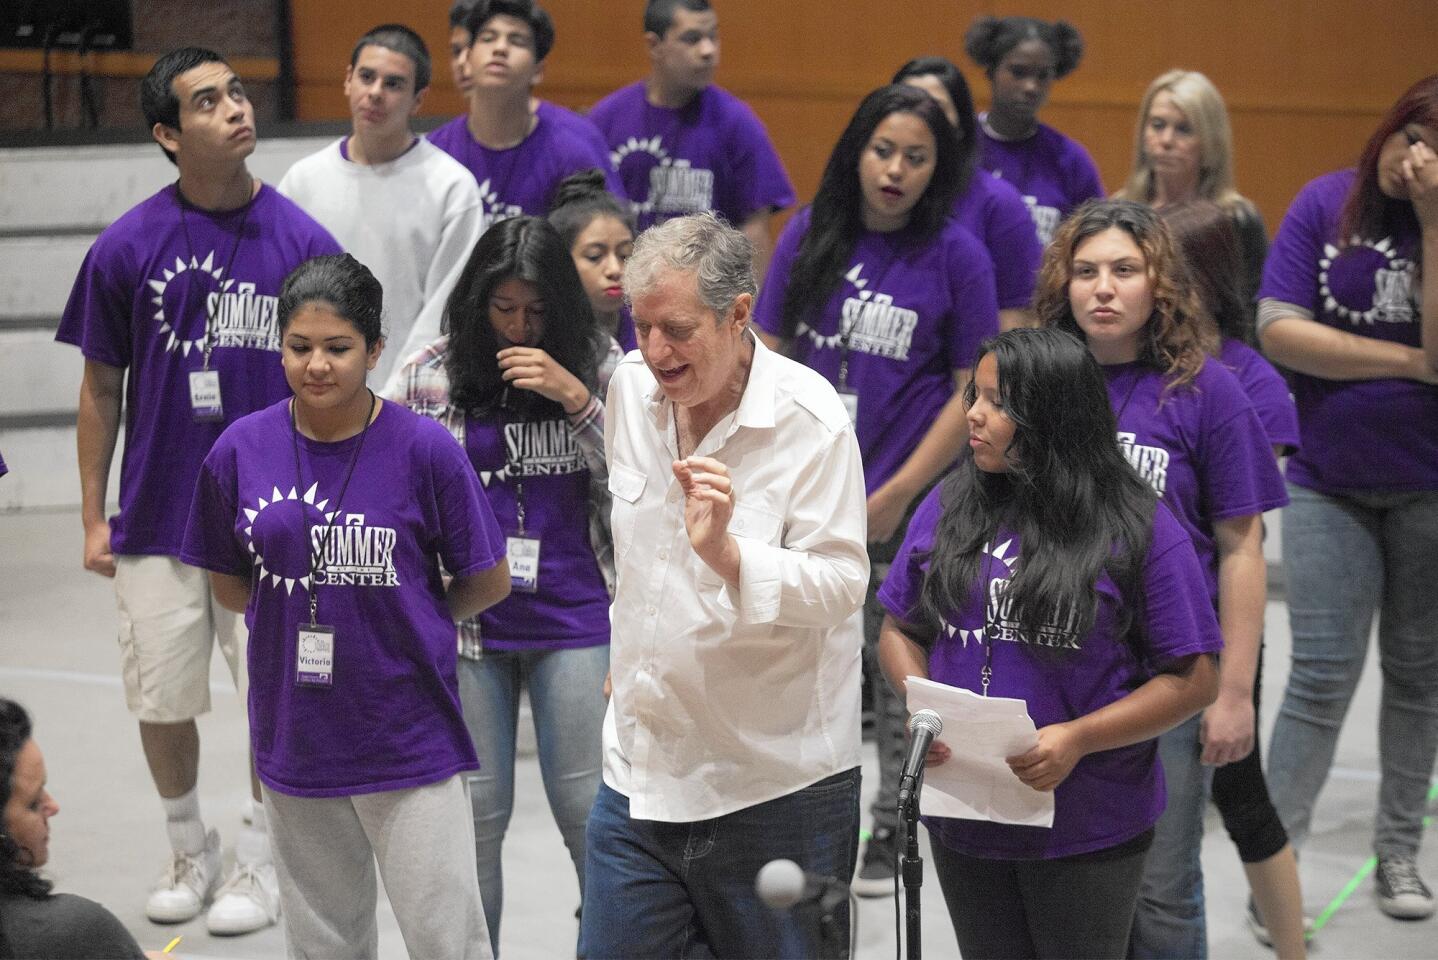 Artistic director Bill Brawley, center, instructs a group of teenagers during a Summer at the Center program on Wednesday.